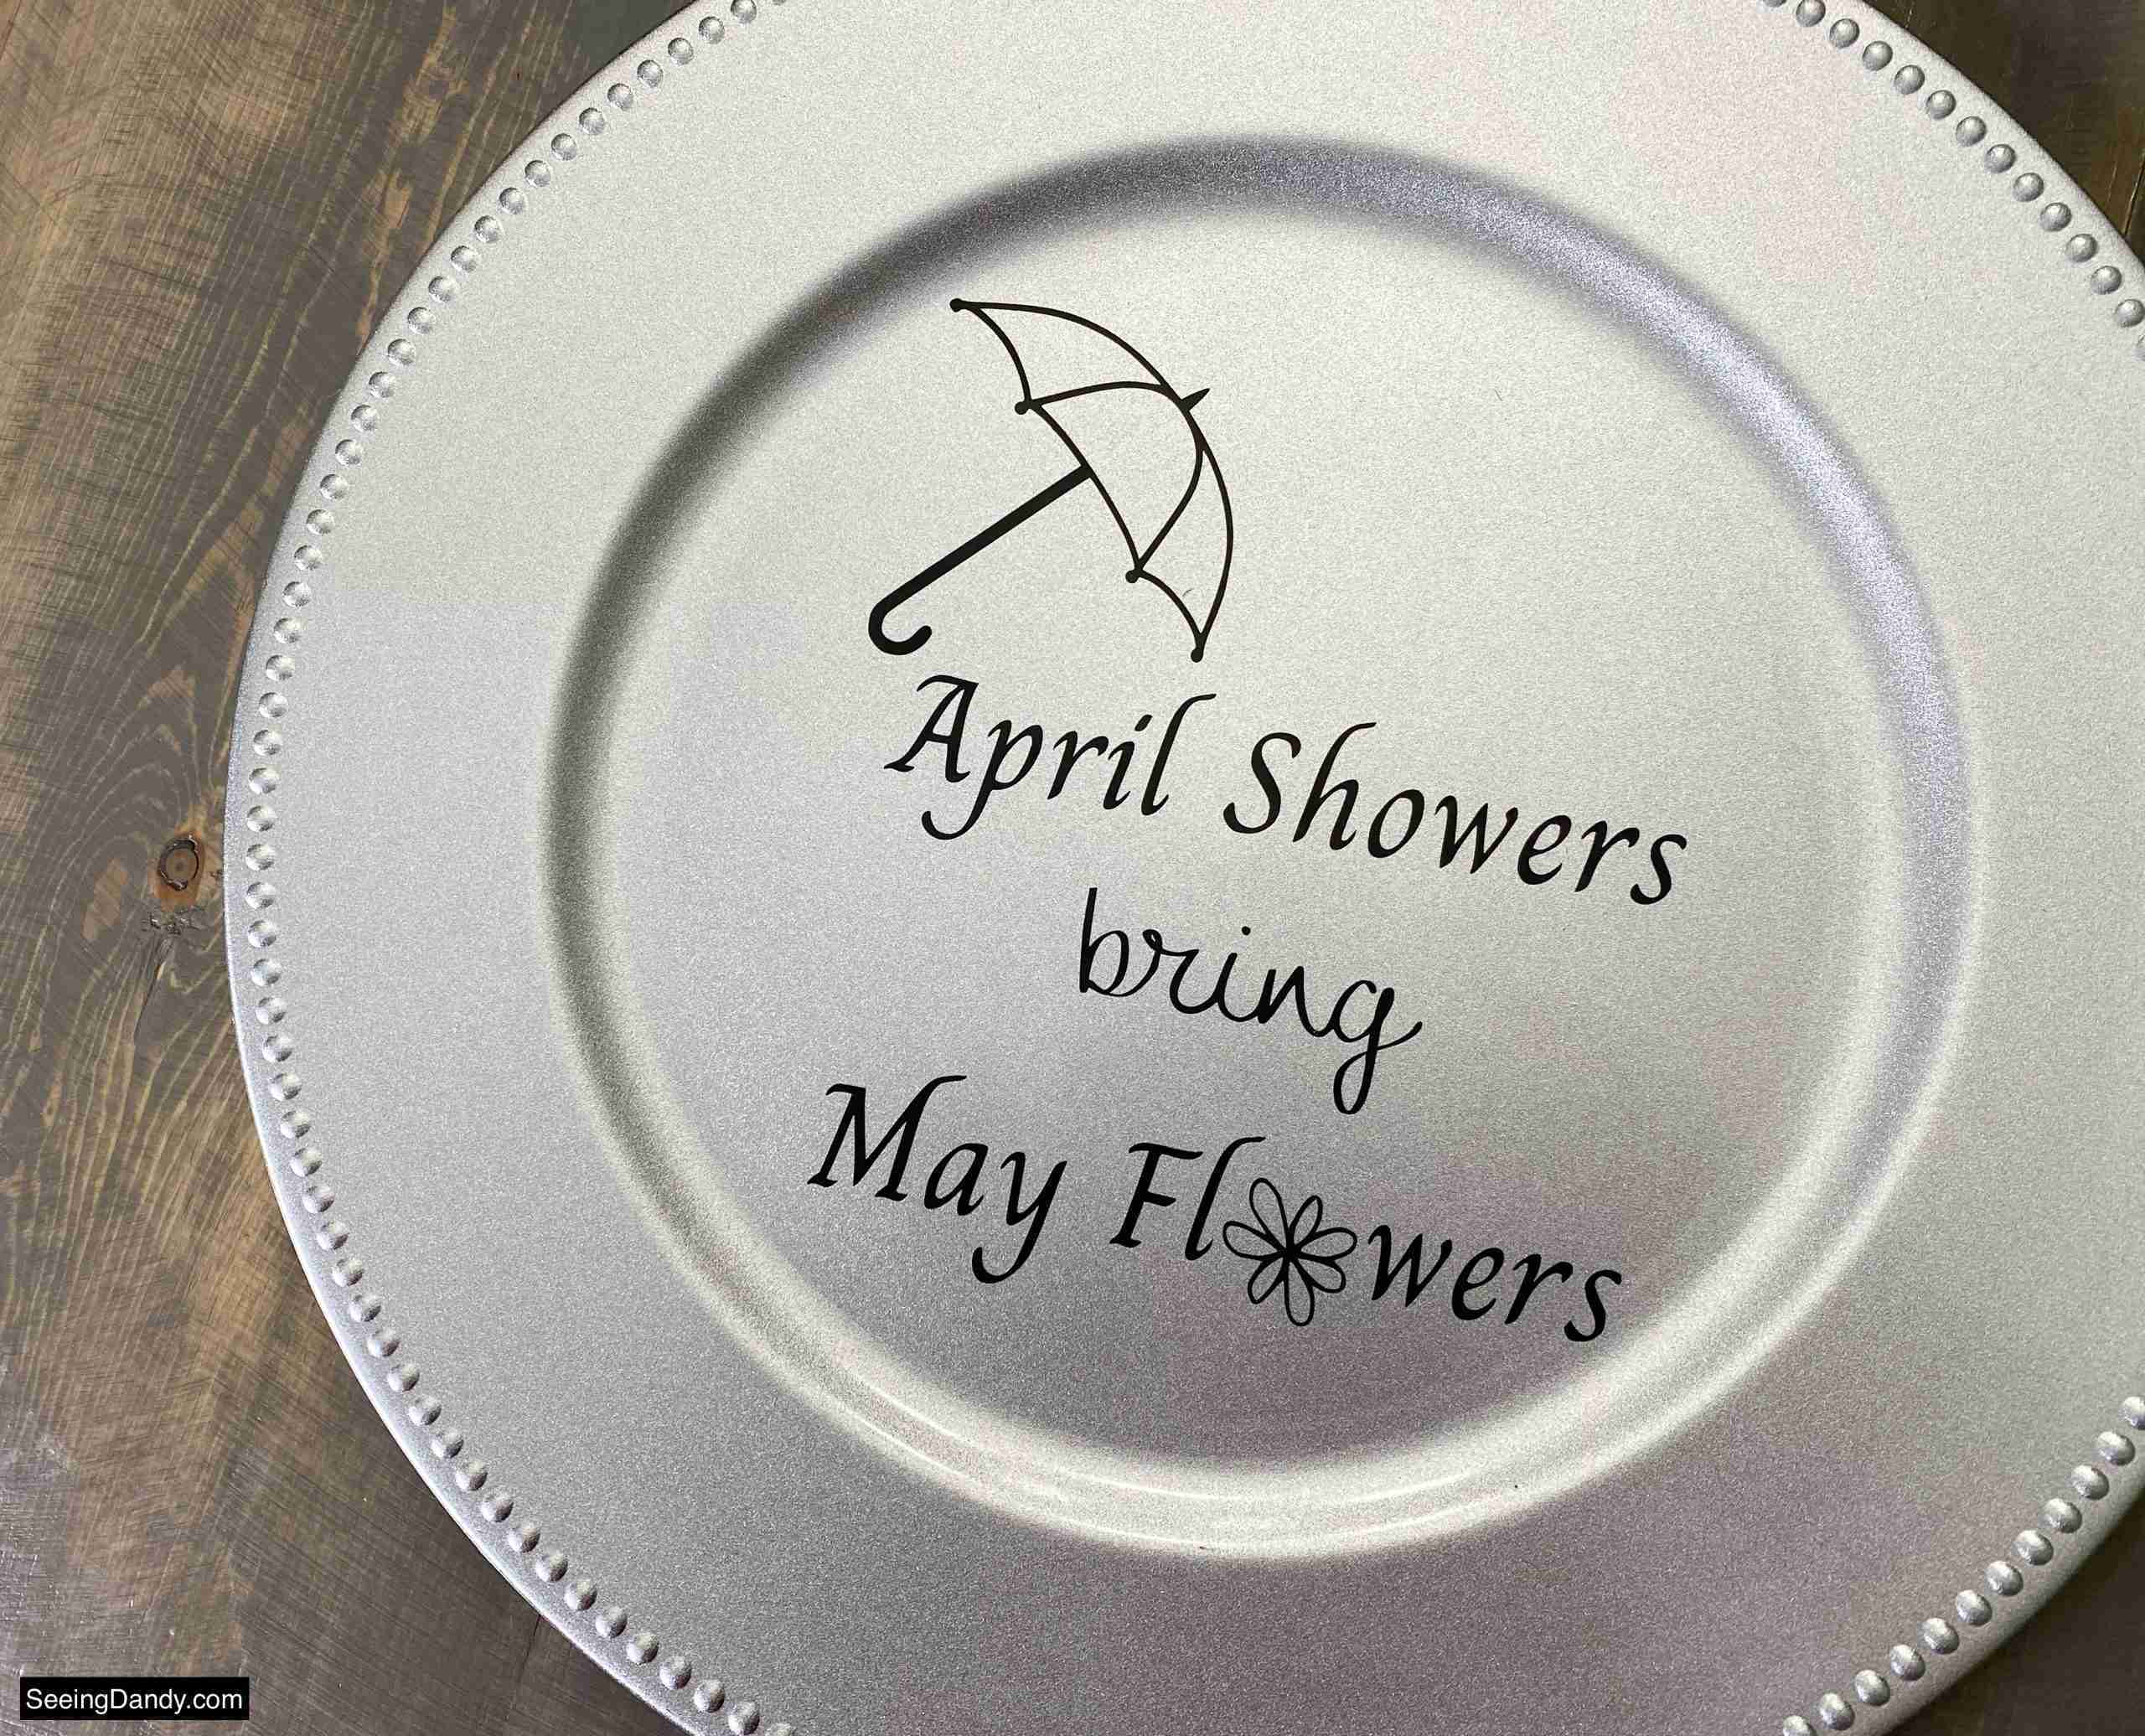 april showers bring may flowers svg file, free svg file, vinyl craft, umbrella svg file, free printables, silver dollar tree plastic charger plate, dollar tree craft ideas, farmhouse table, easy crafts